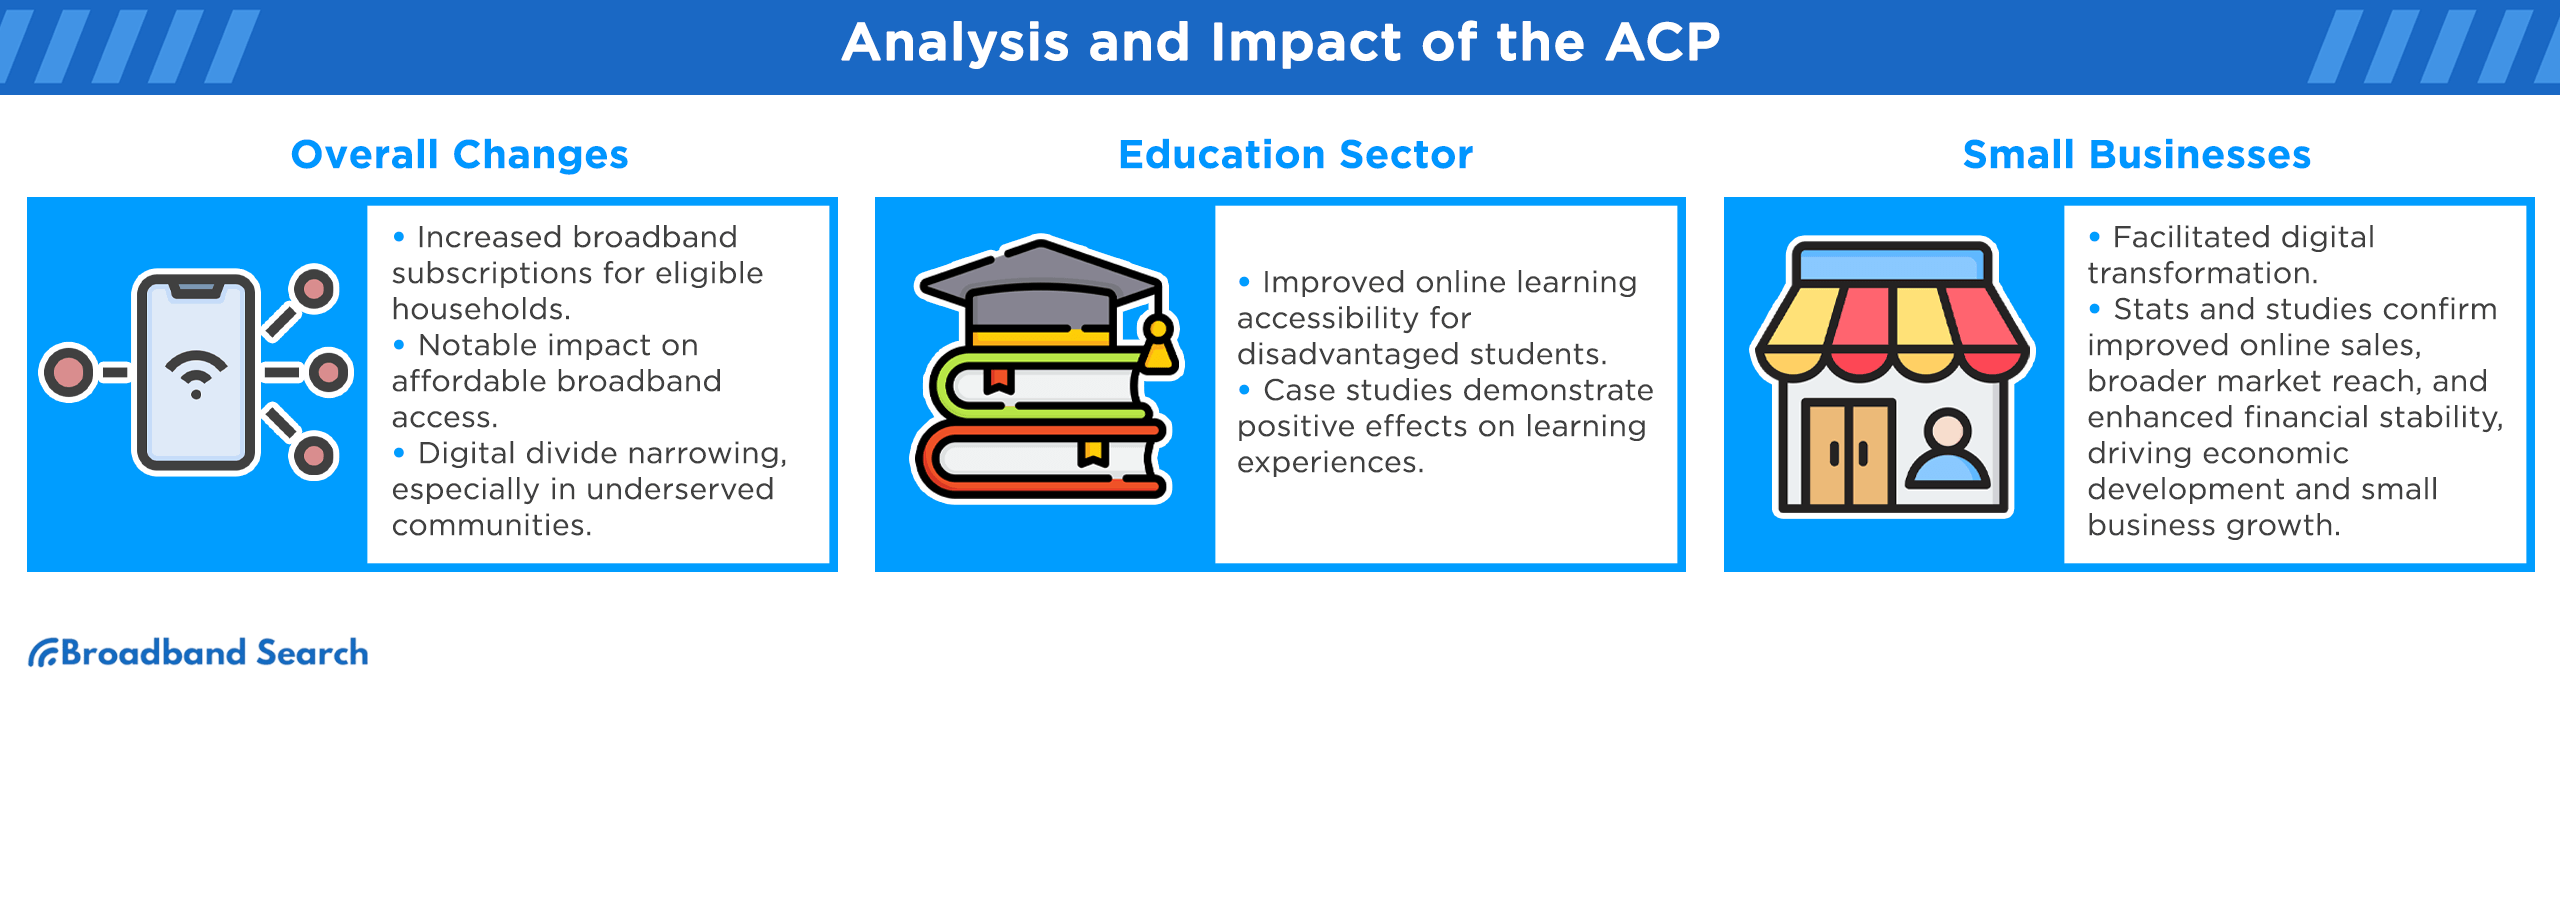 Analysis and impact of the ACP